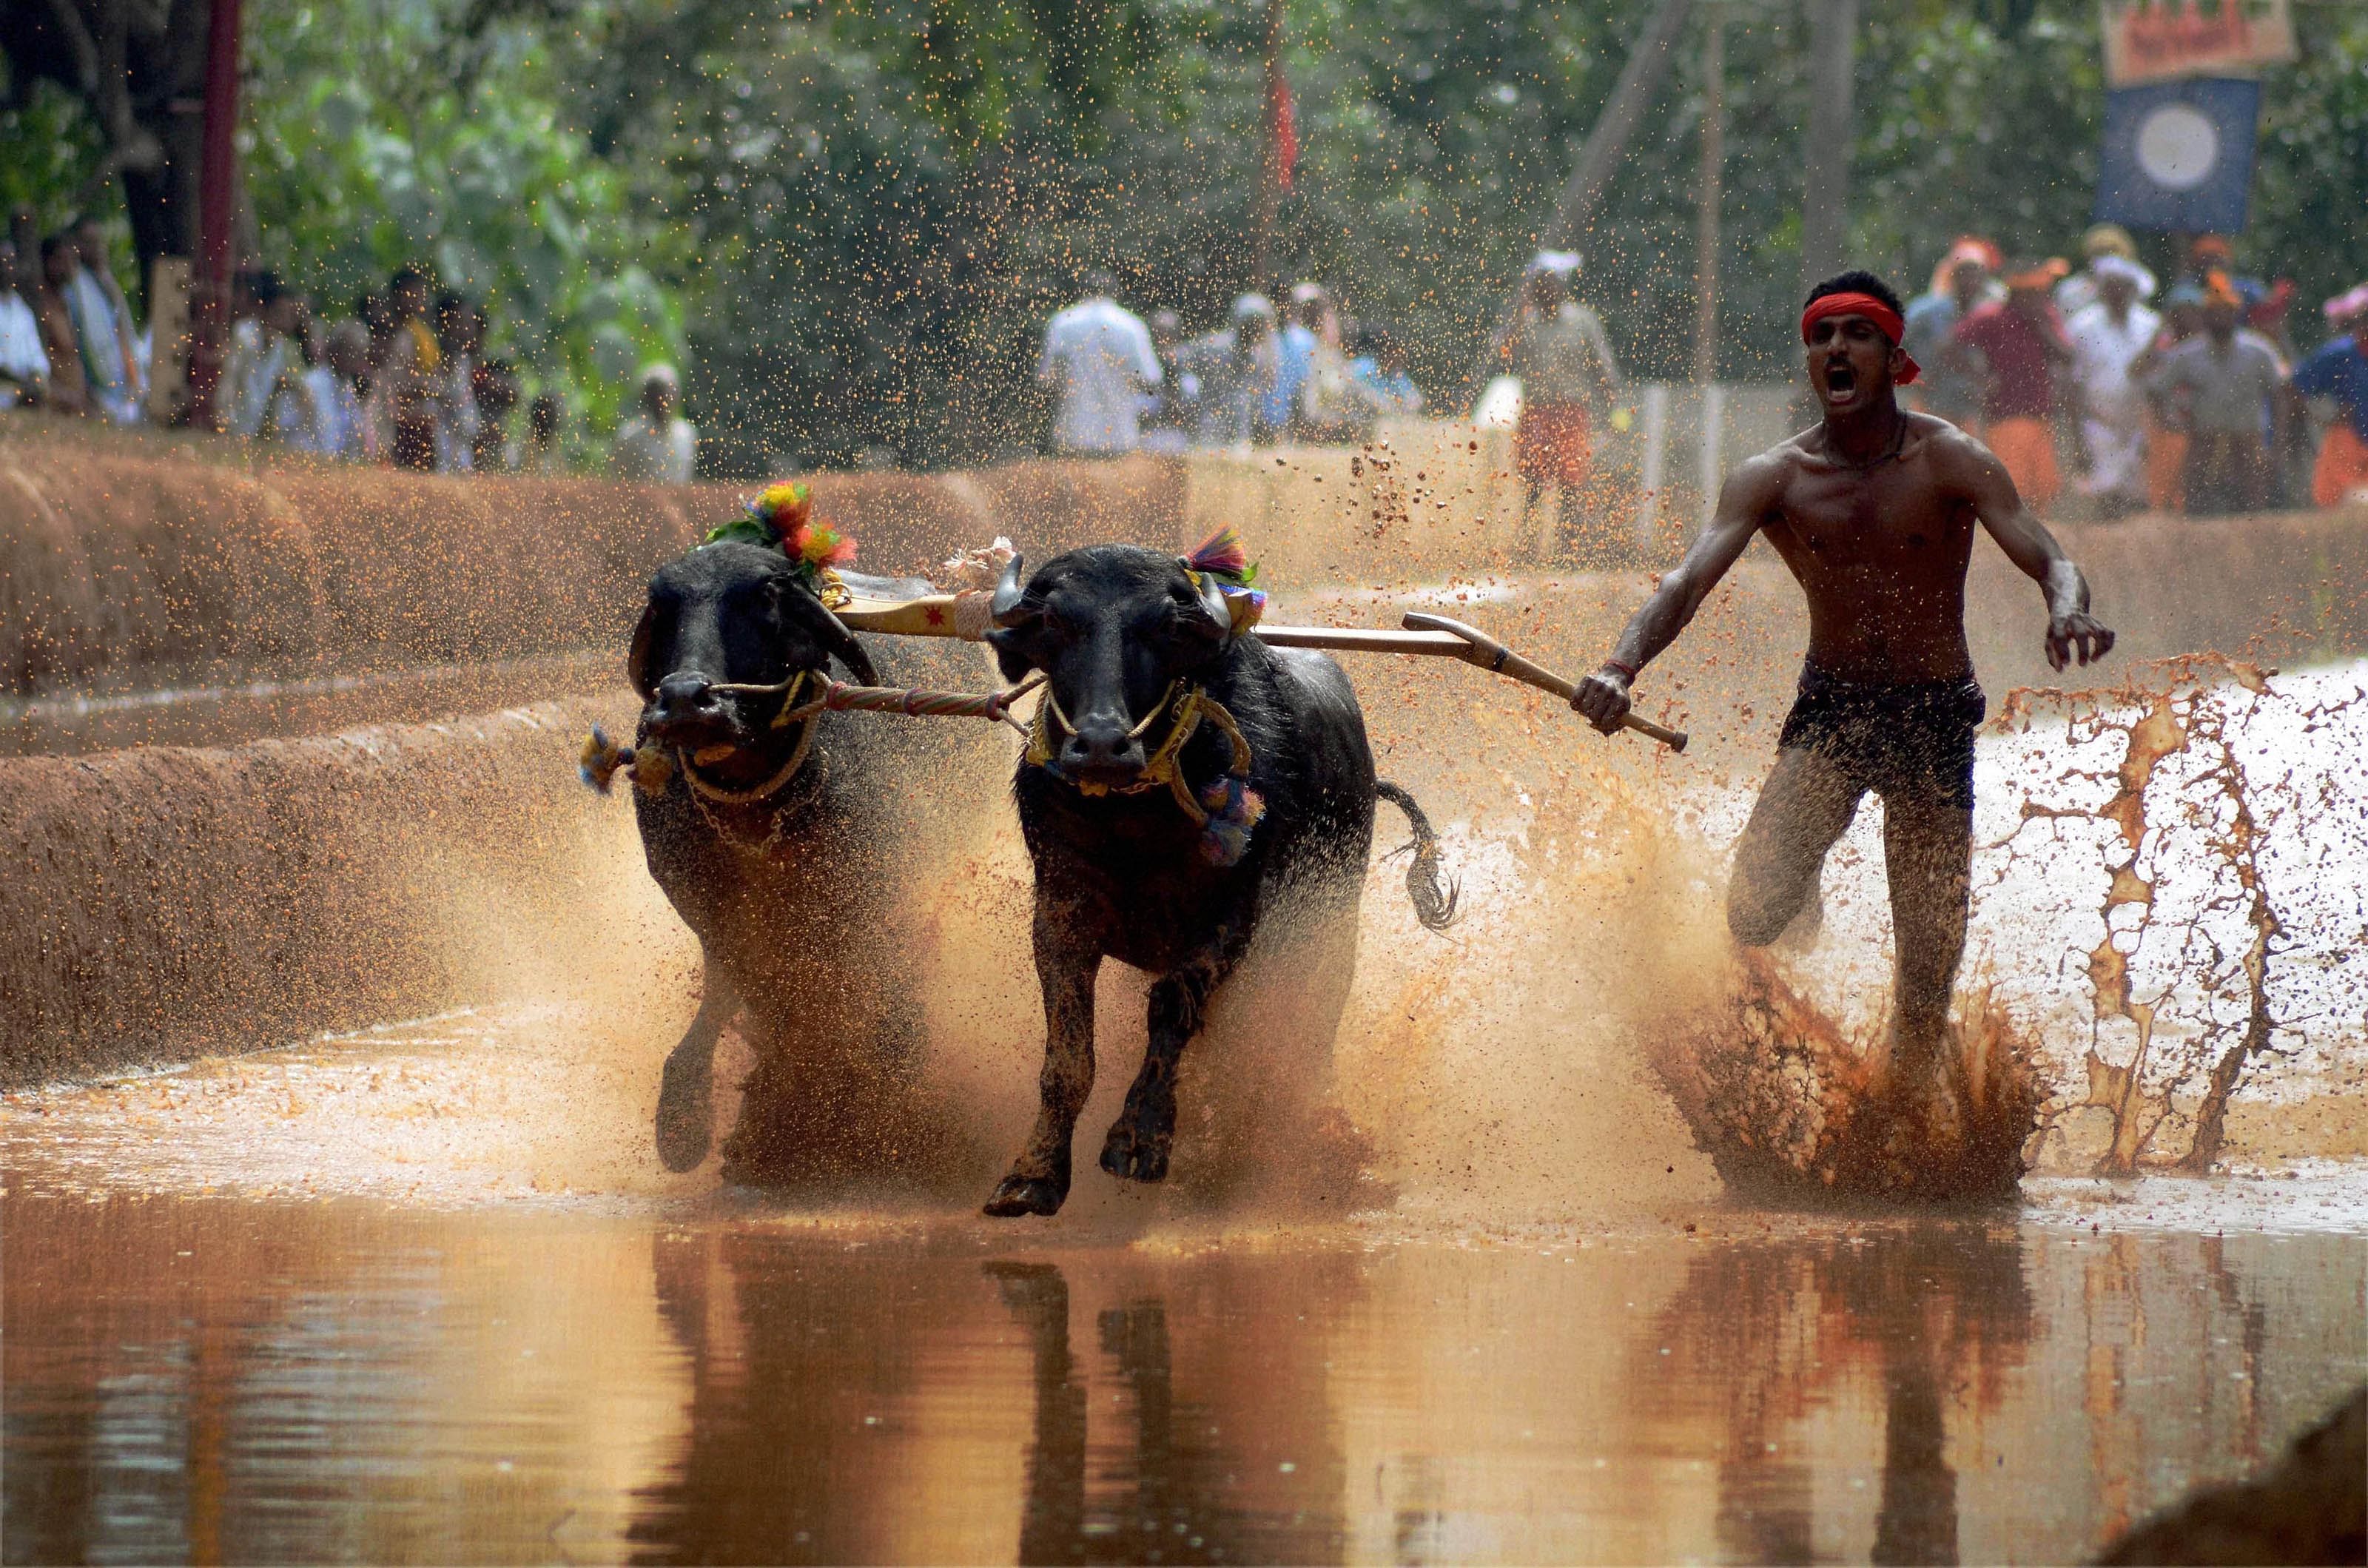 Kambala Committees have filed an interim application, seeking vacation of the stay. The matter came up yesterday before the division bench of the High Court, which adjourned the case to January 30. PTI FIle Photo